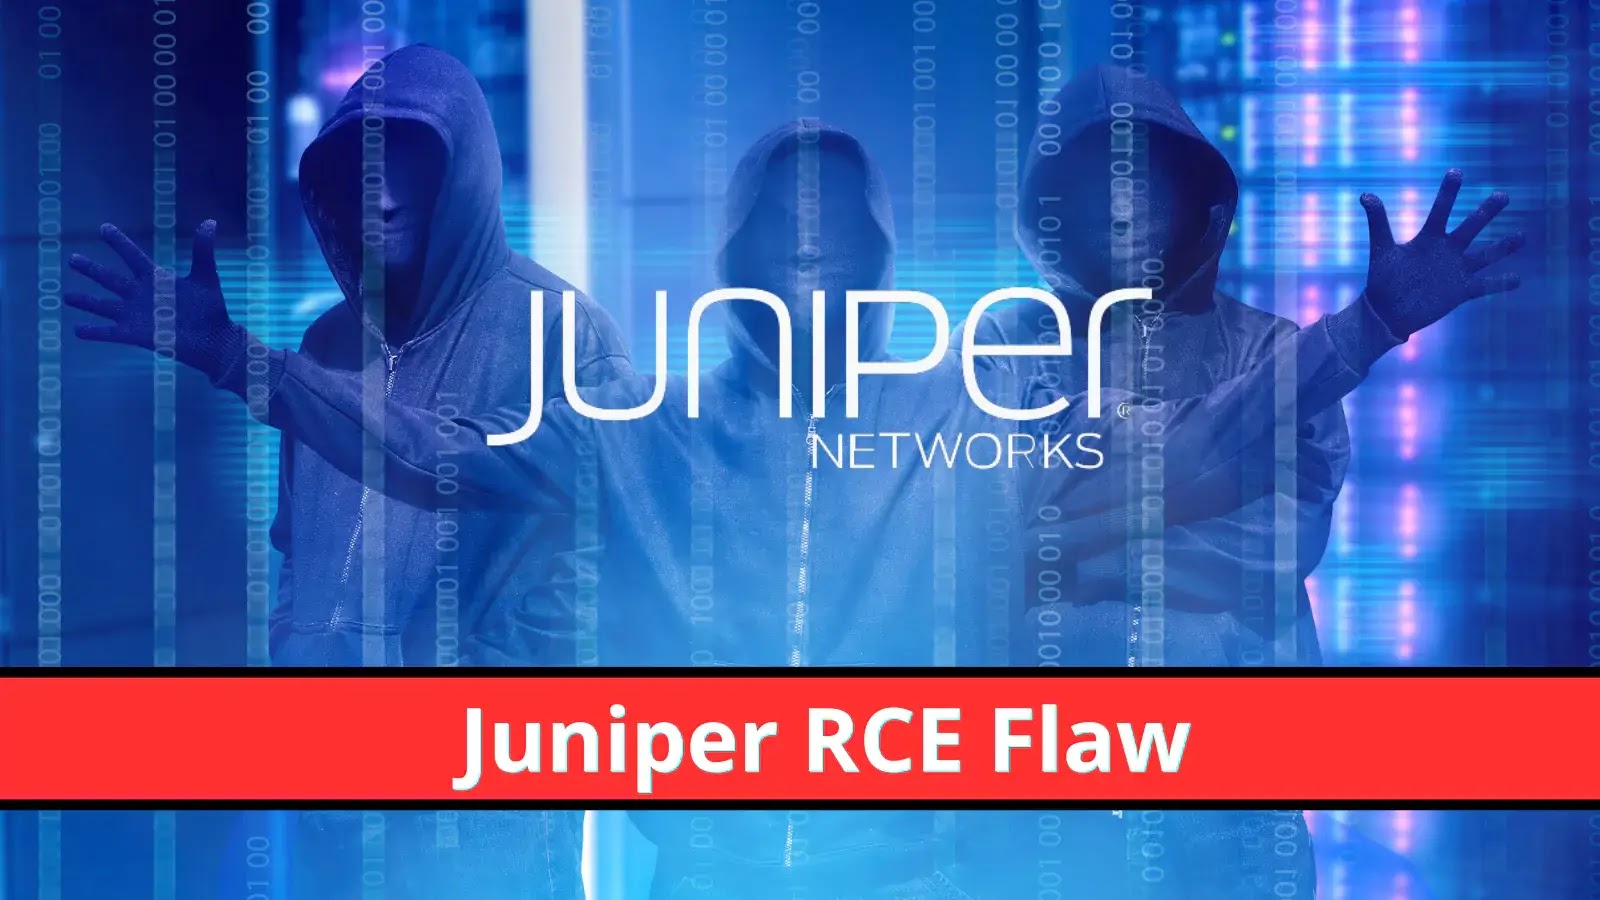 Threat actors started exploiting Juniper flaws shortly after PoC release